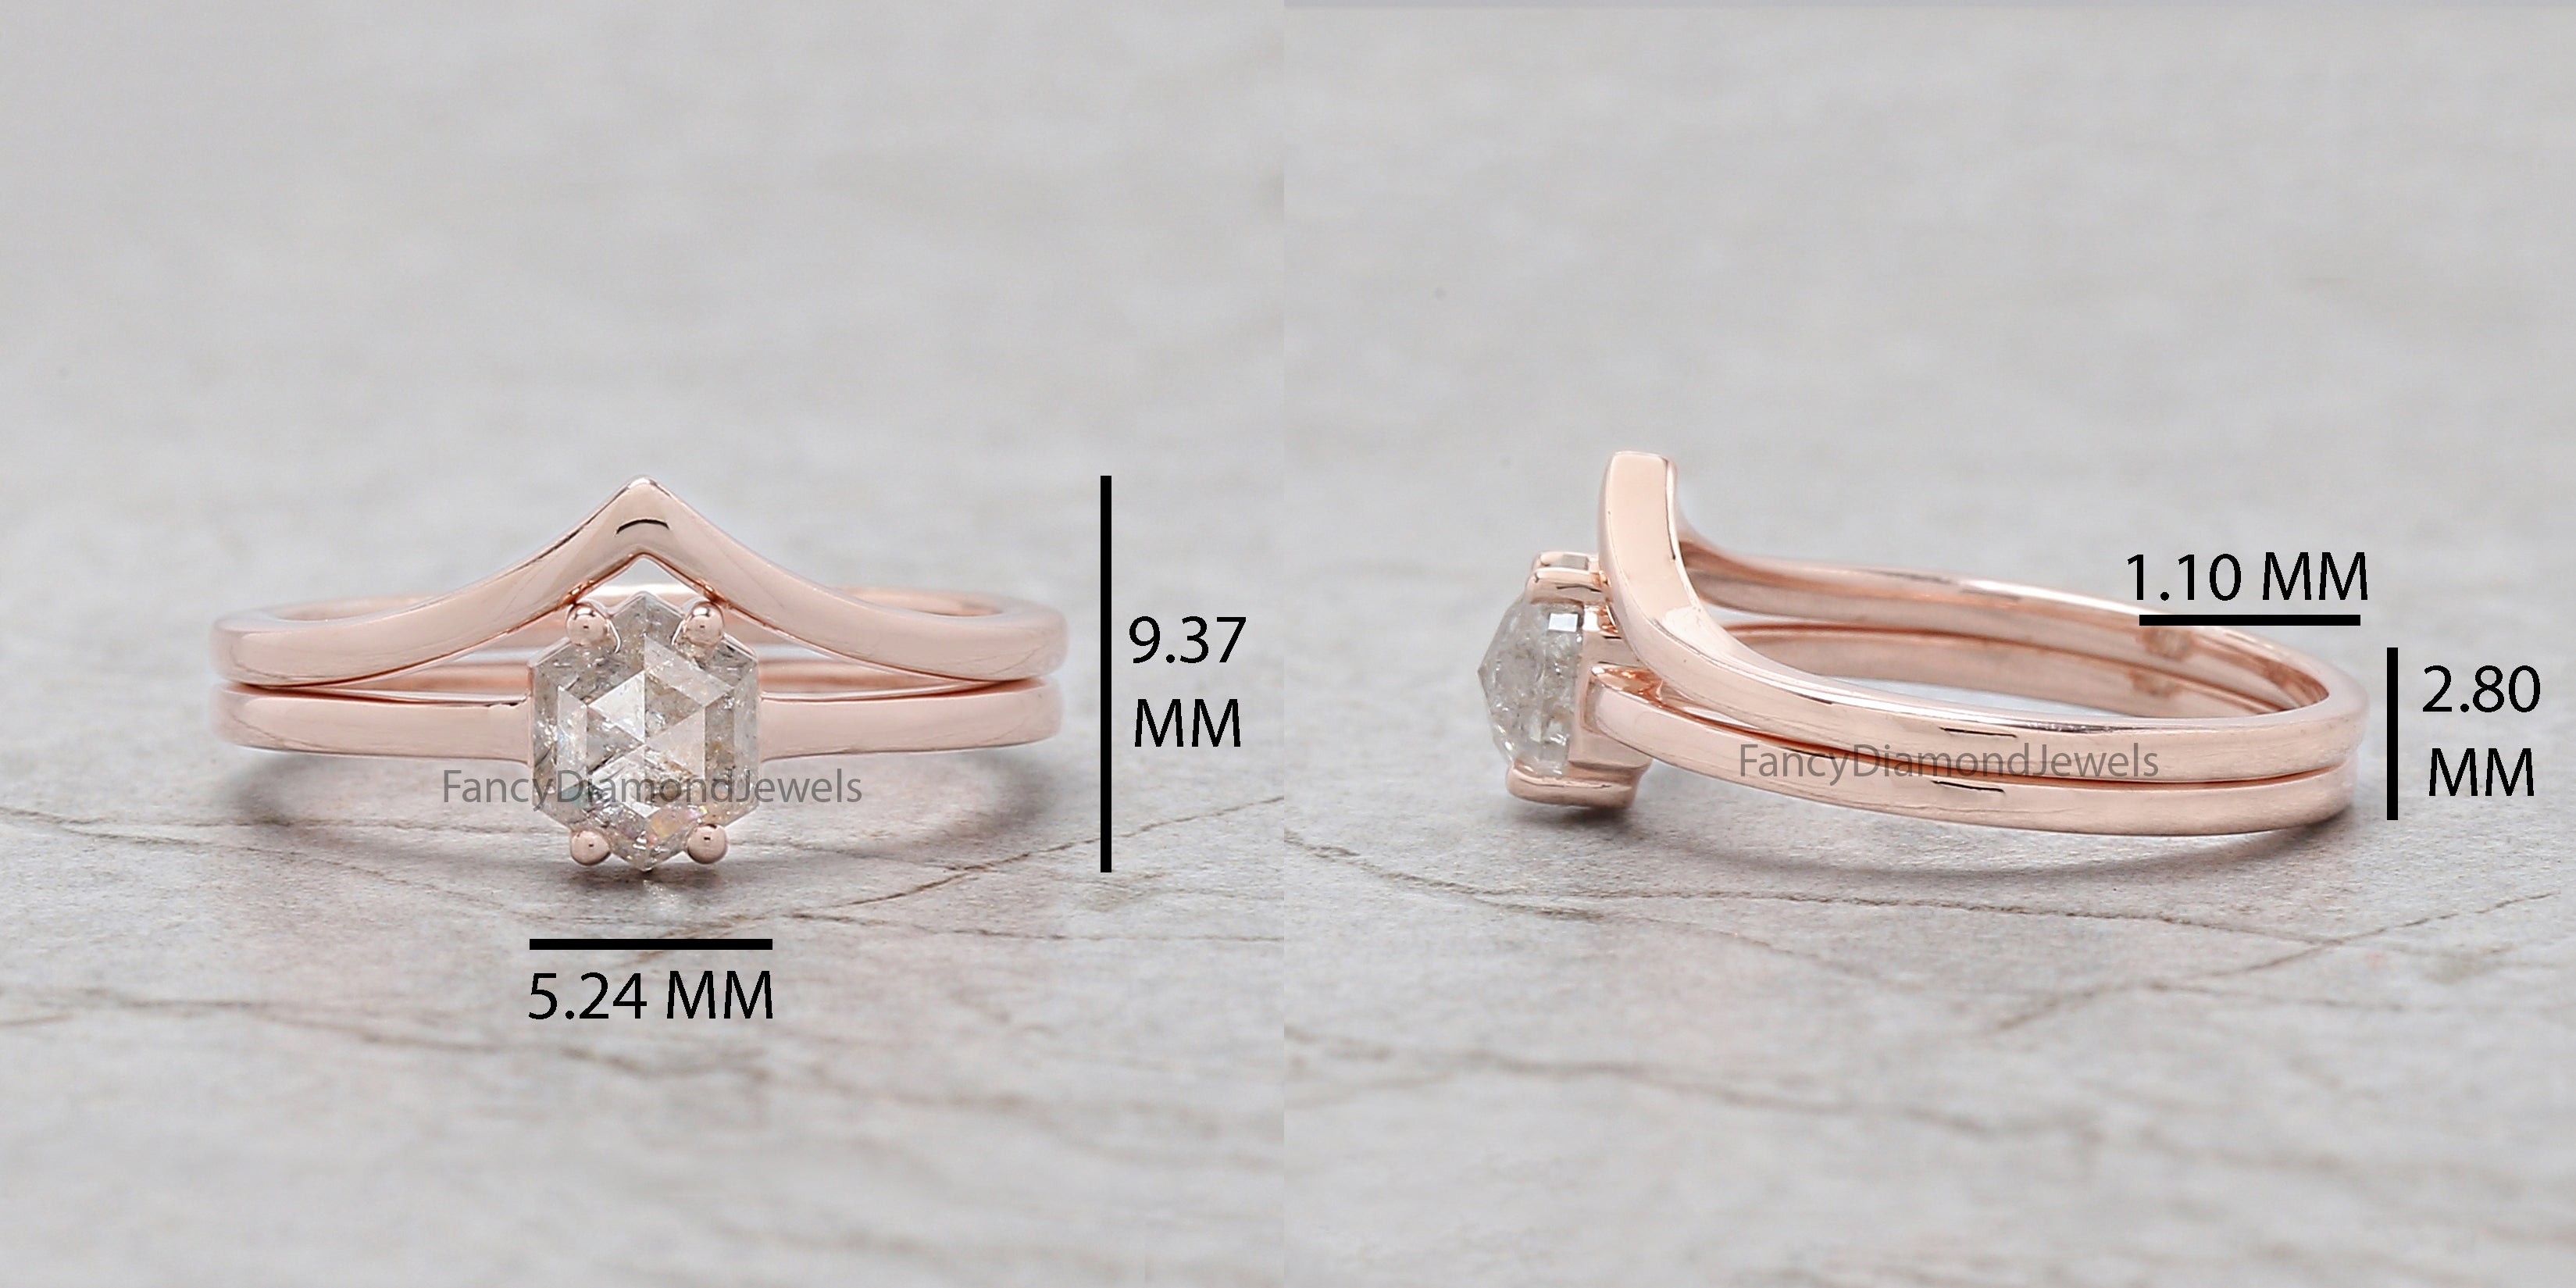 Hexagon Cut Salt And Pepper Diamond Ring 0.78 Ct 6.15 MM Hexagon Diamond Ring 14K Solid Rose Gold Silver Engagement Ring Gift For Her QN2183